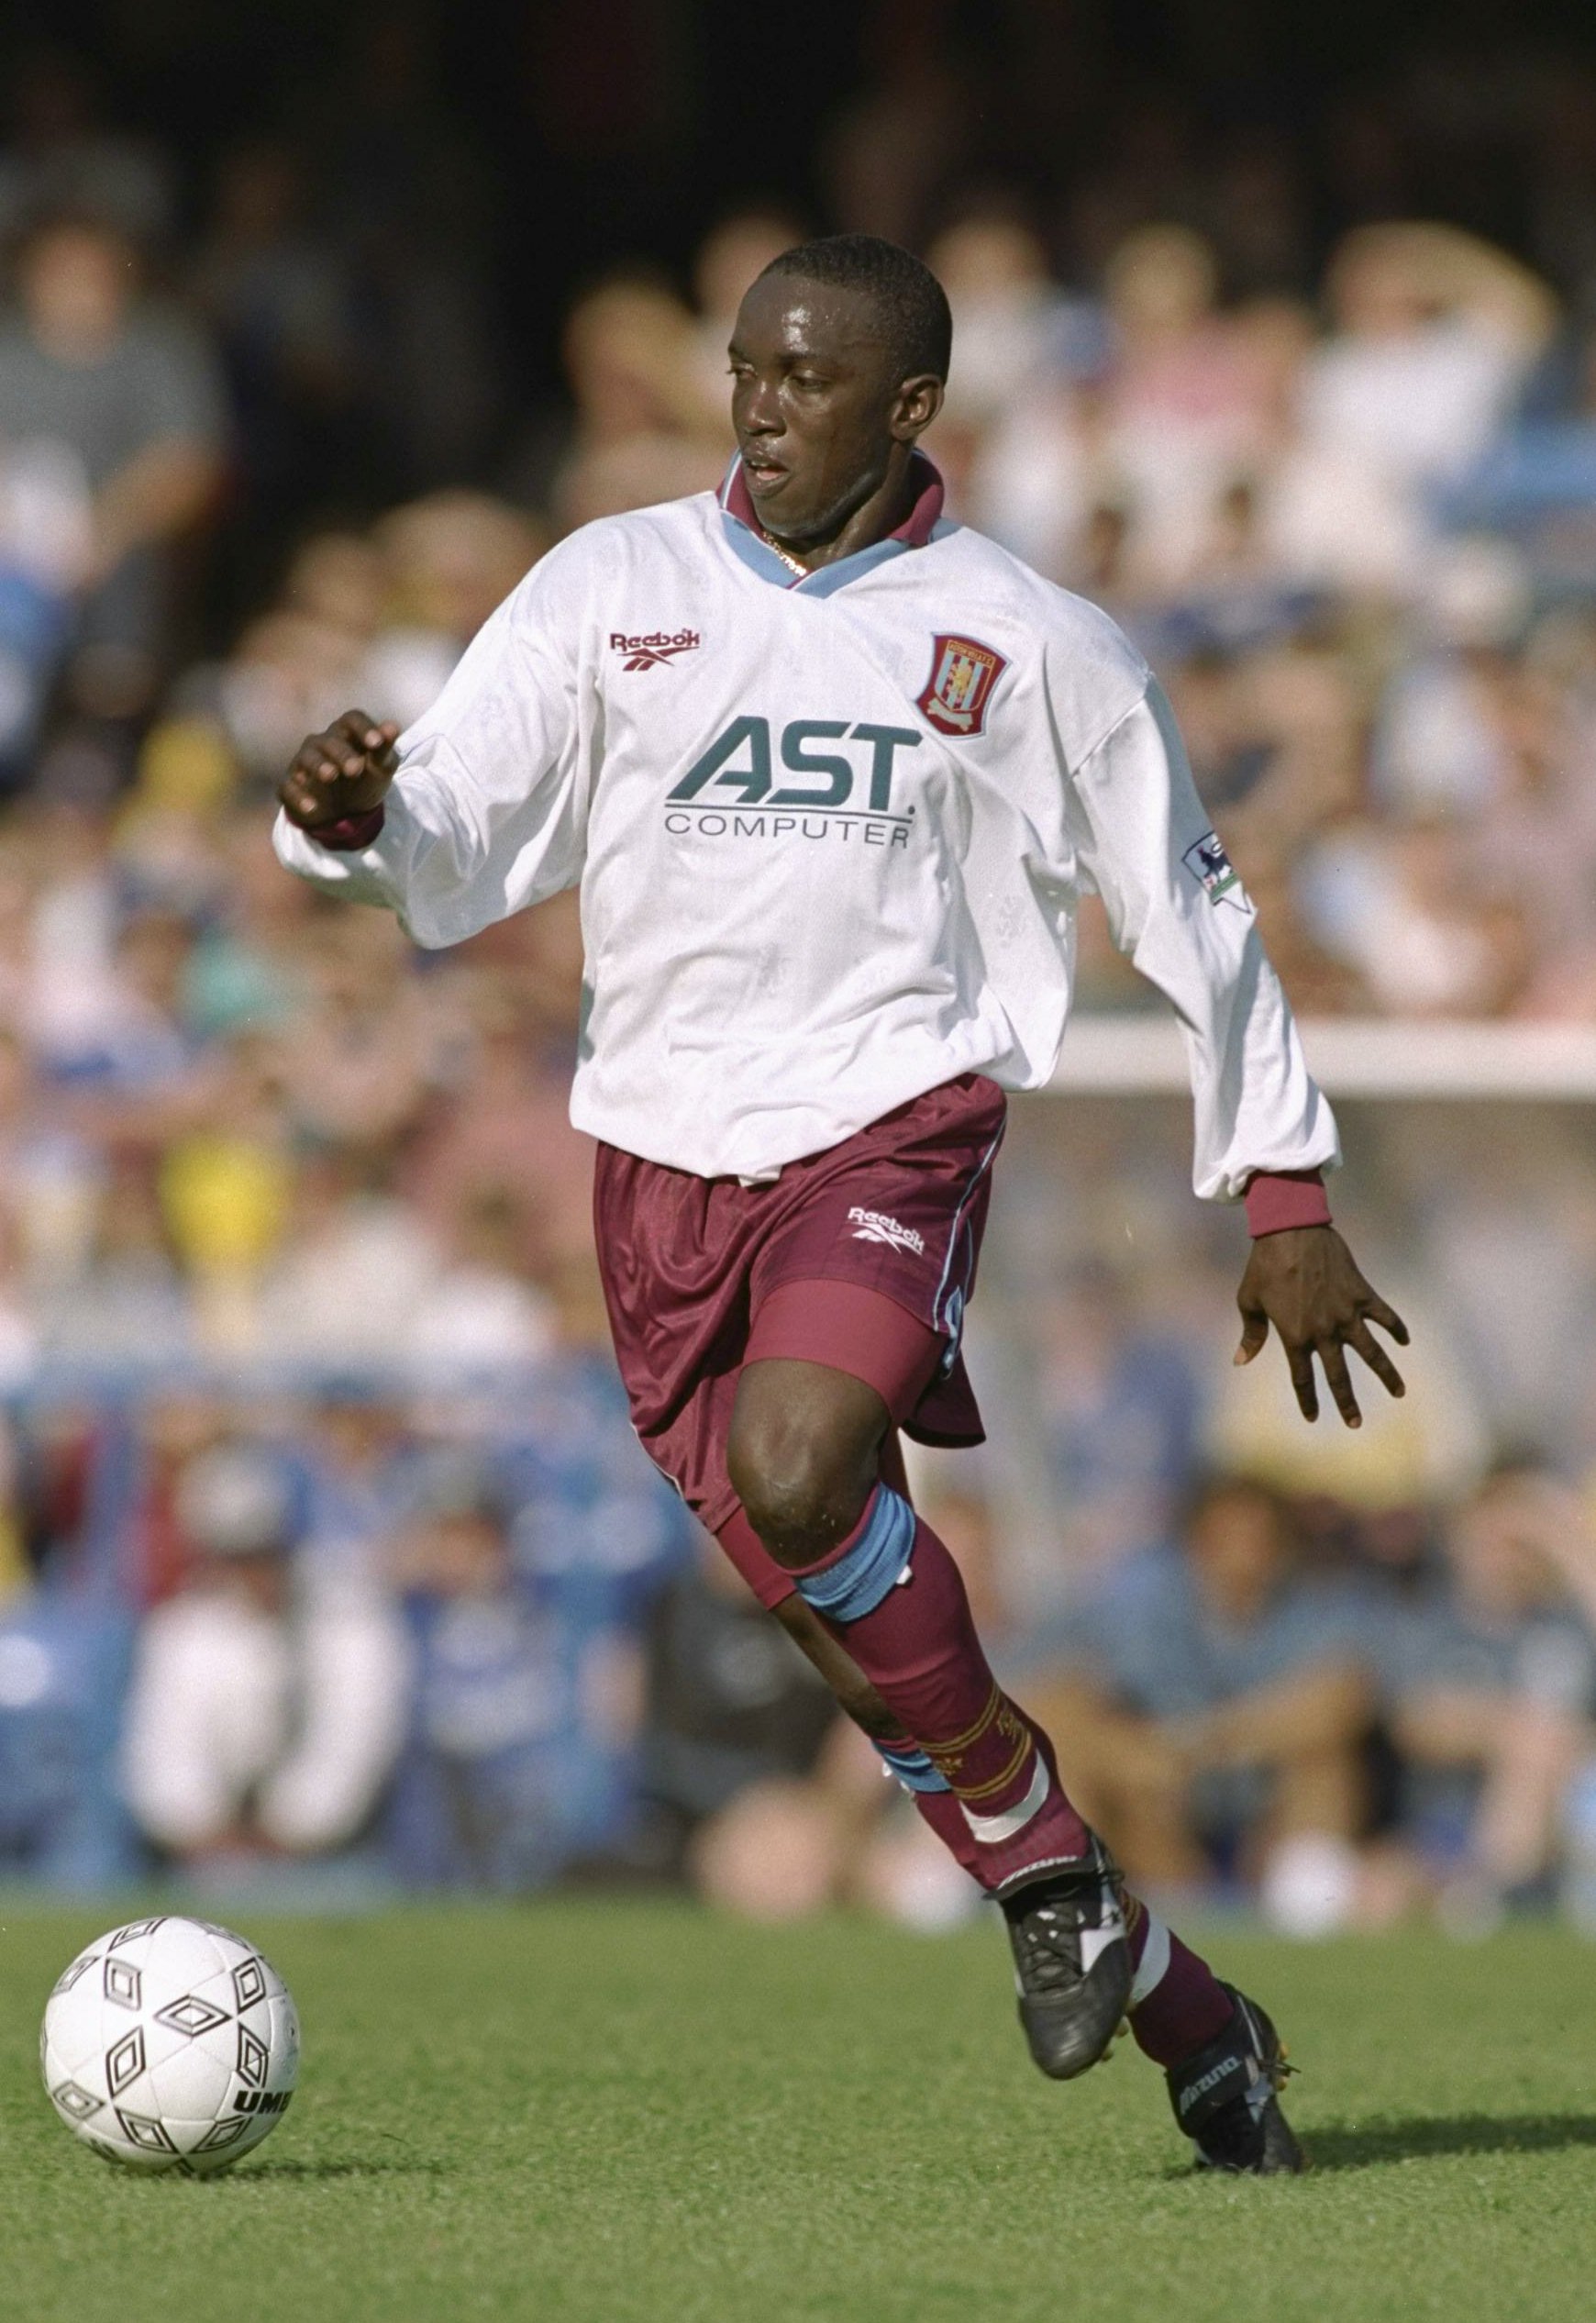 15 Sep 1996:  Dwight Yorke of Aston Villa in action during the FA Carling Premiership match between Chelsea and Aston Villa at Stamford Bridge in London. The match ended in a 1-1 draw. Mandatory Credit: Clive Brunskill/Allsport